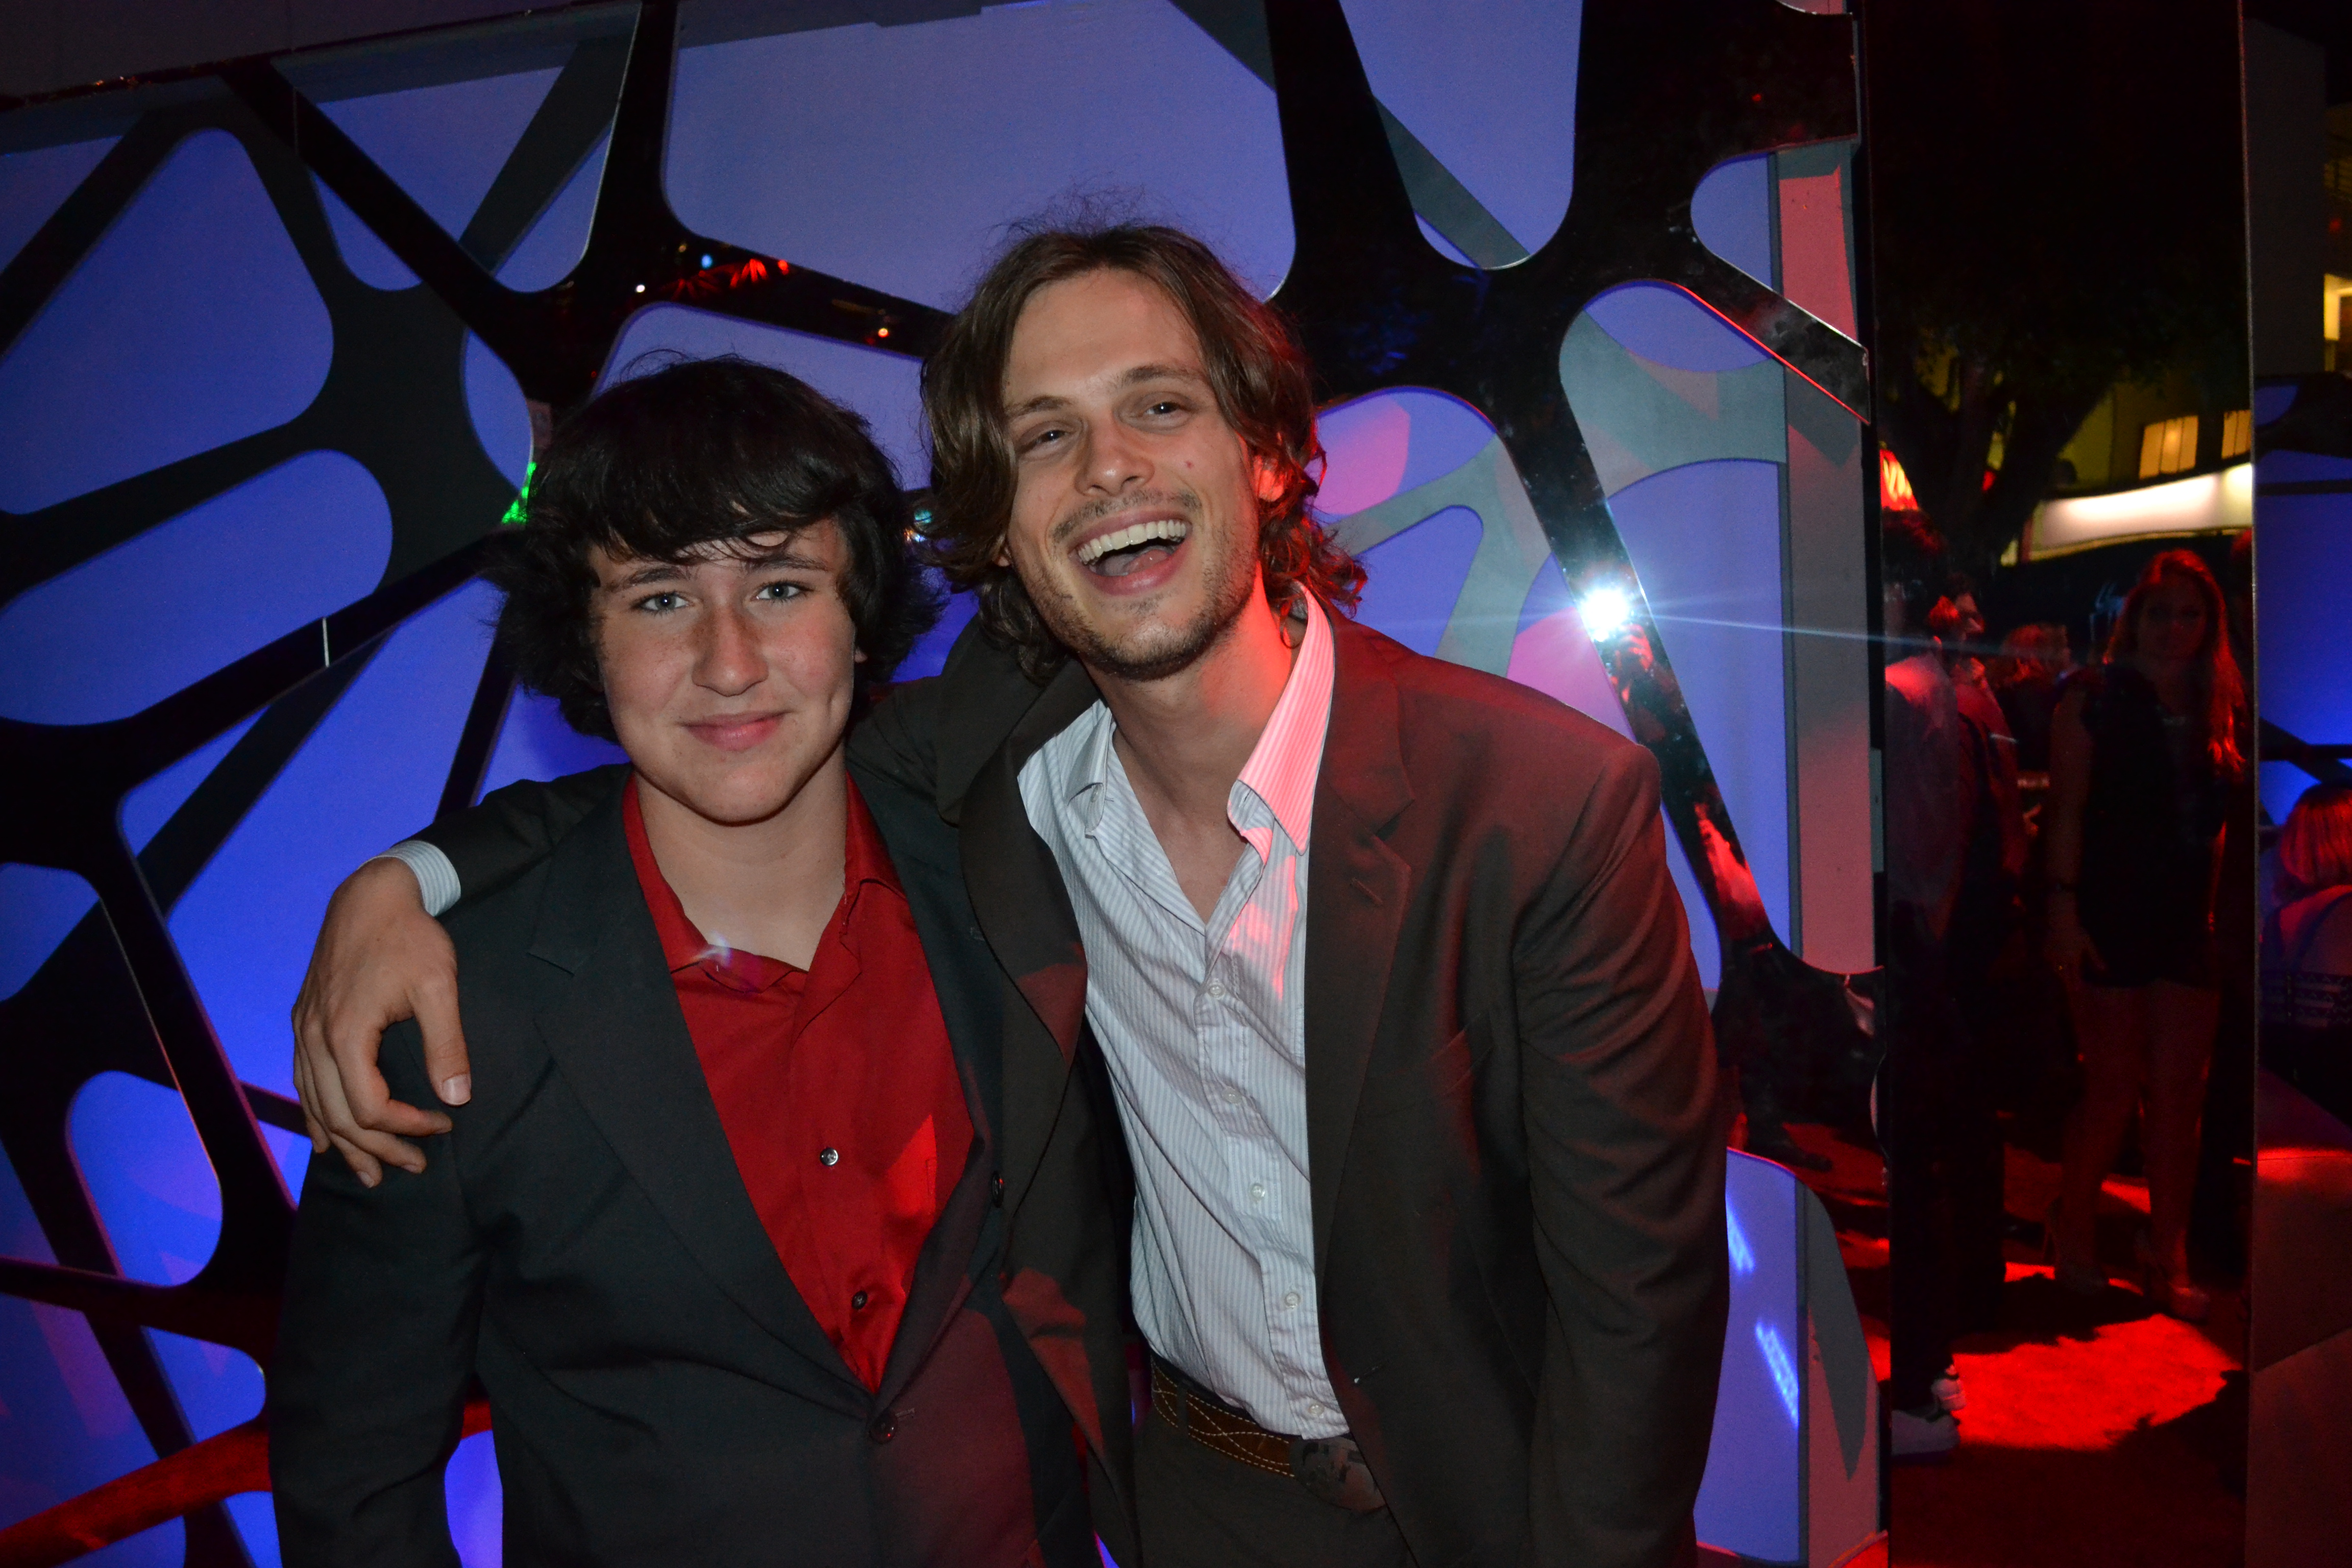 At the after party of The Amazing Spiderman Premiere with Matthew Gubler